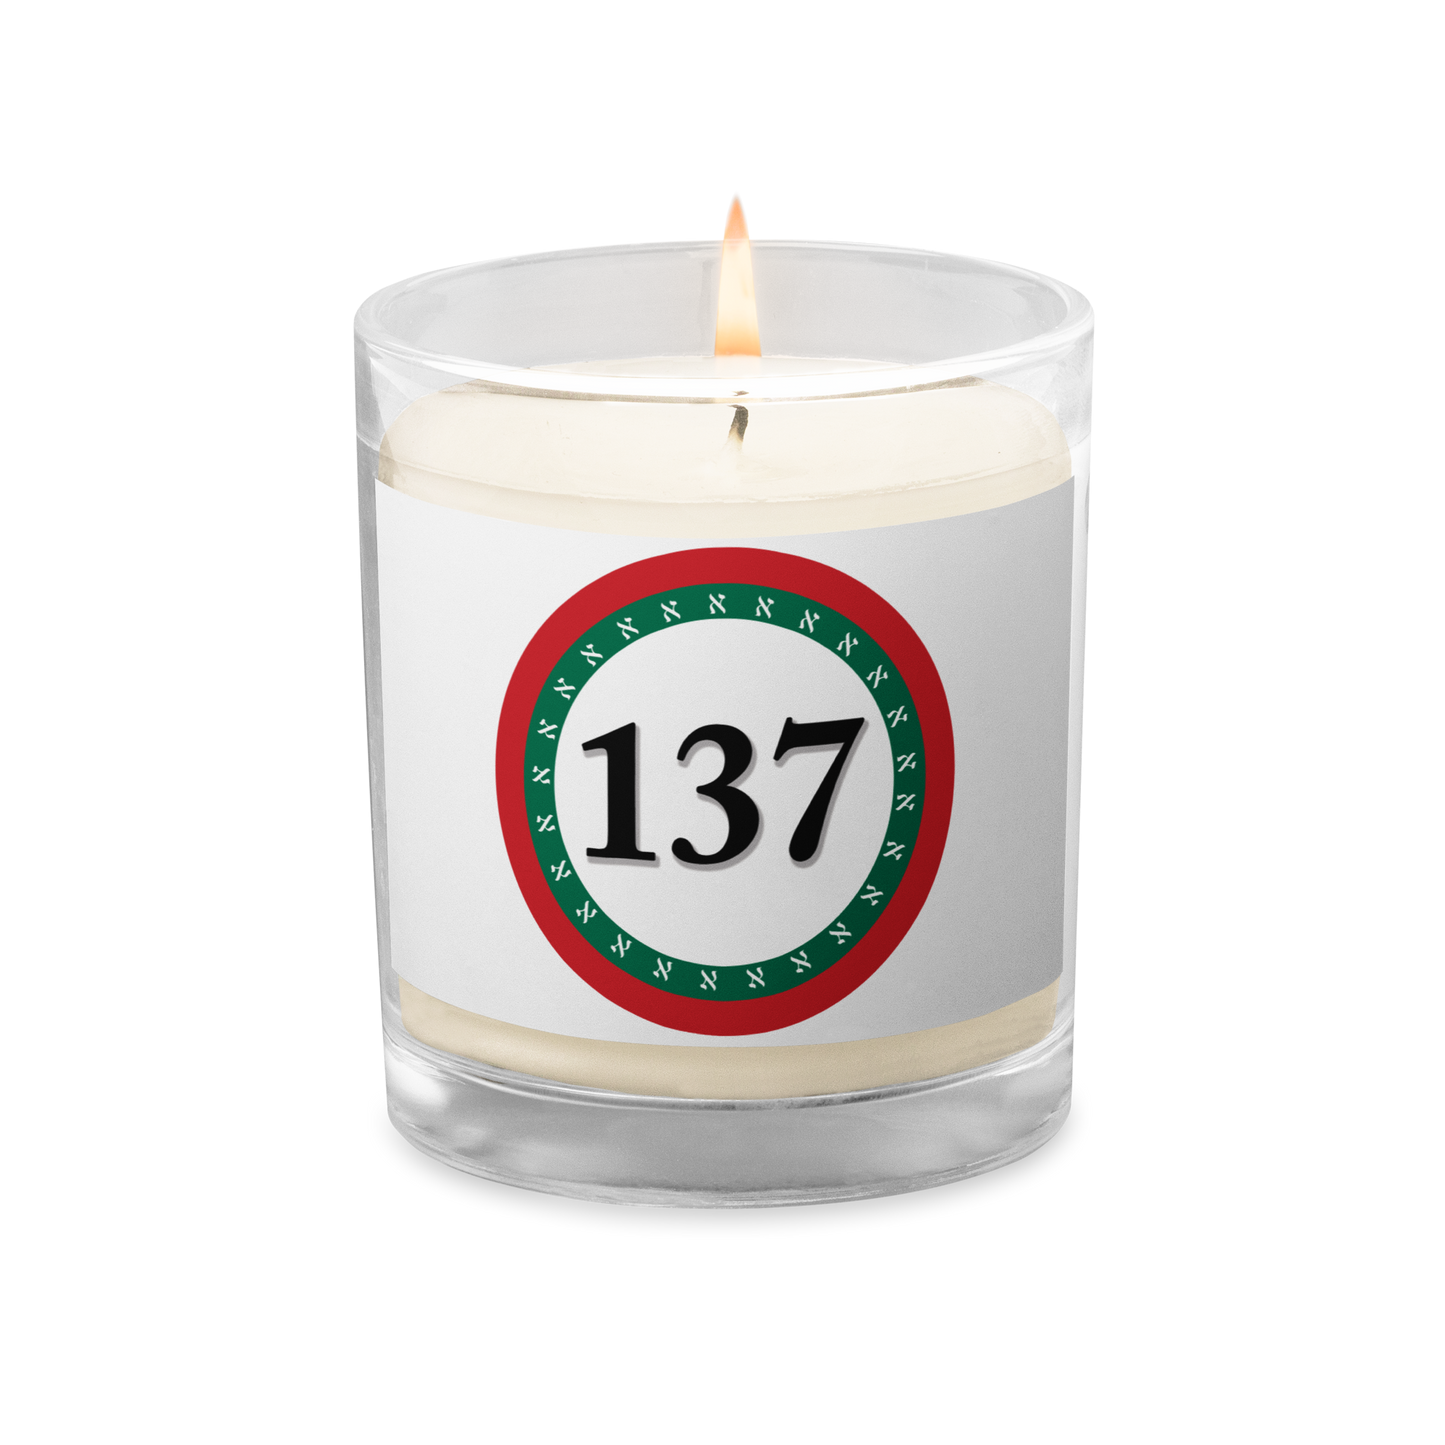 Glass Jar Soy Wax Candle-137 Consciousness-3-137online.com